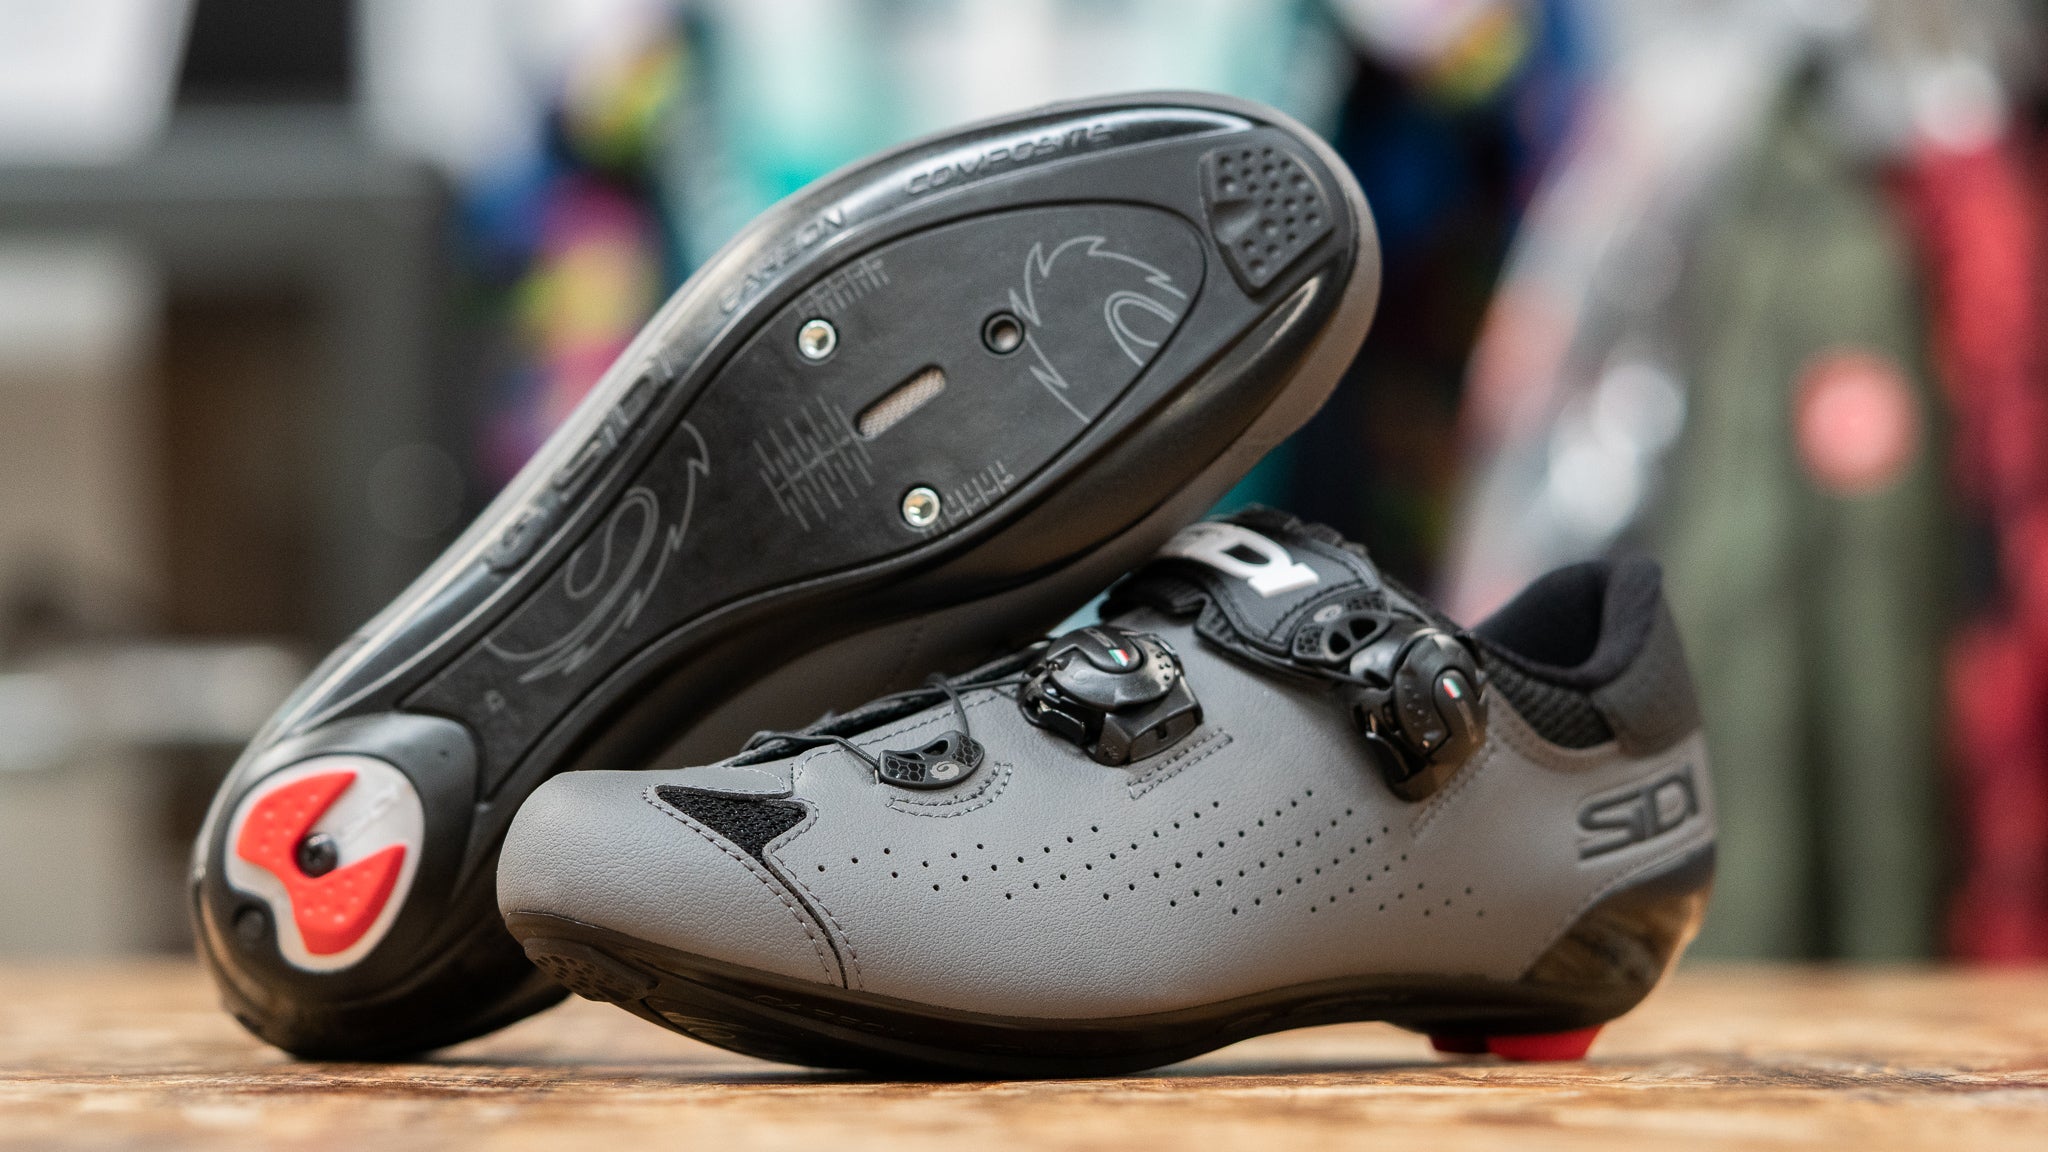 Sidi Genius 10 road cycling shoes stacked on table